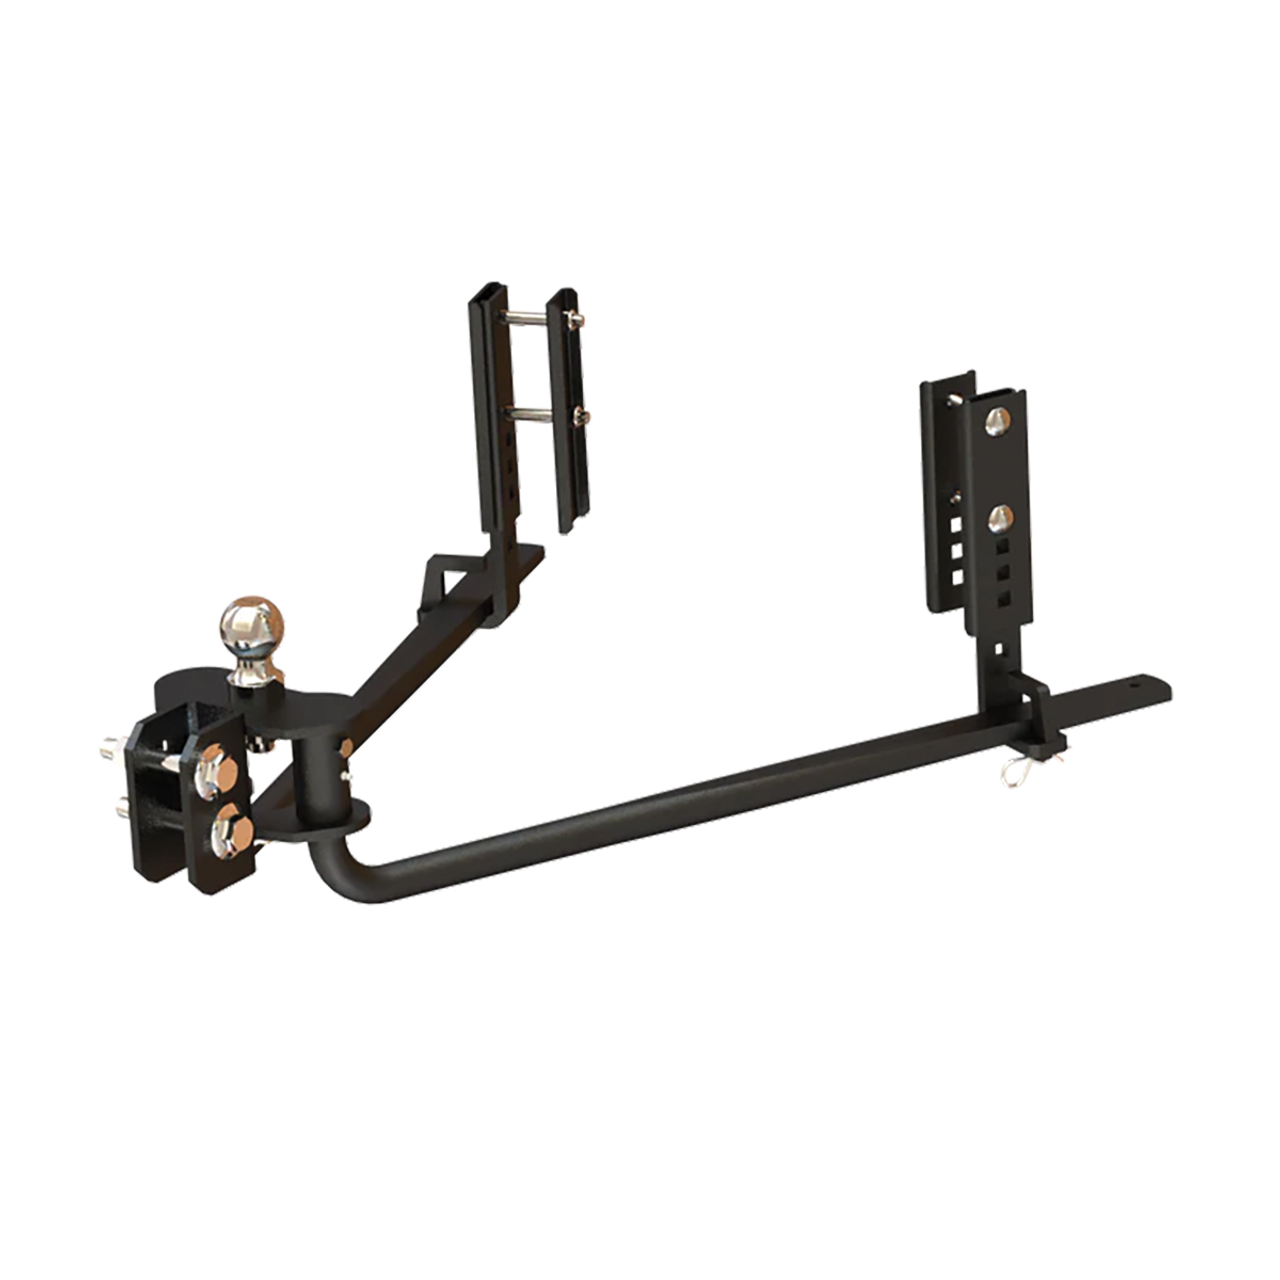 MDWD --- Weight Distributing Hitch and Sway Control - 10,000lb